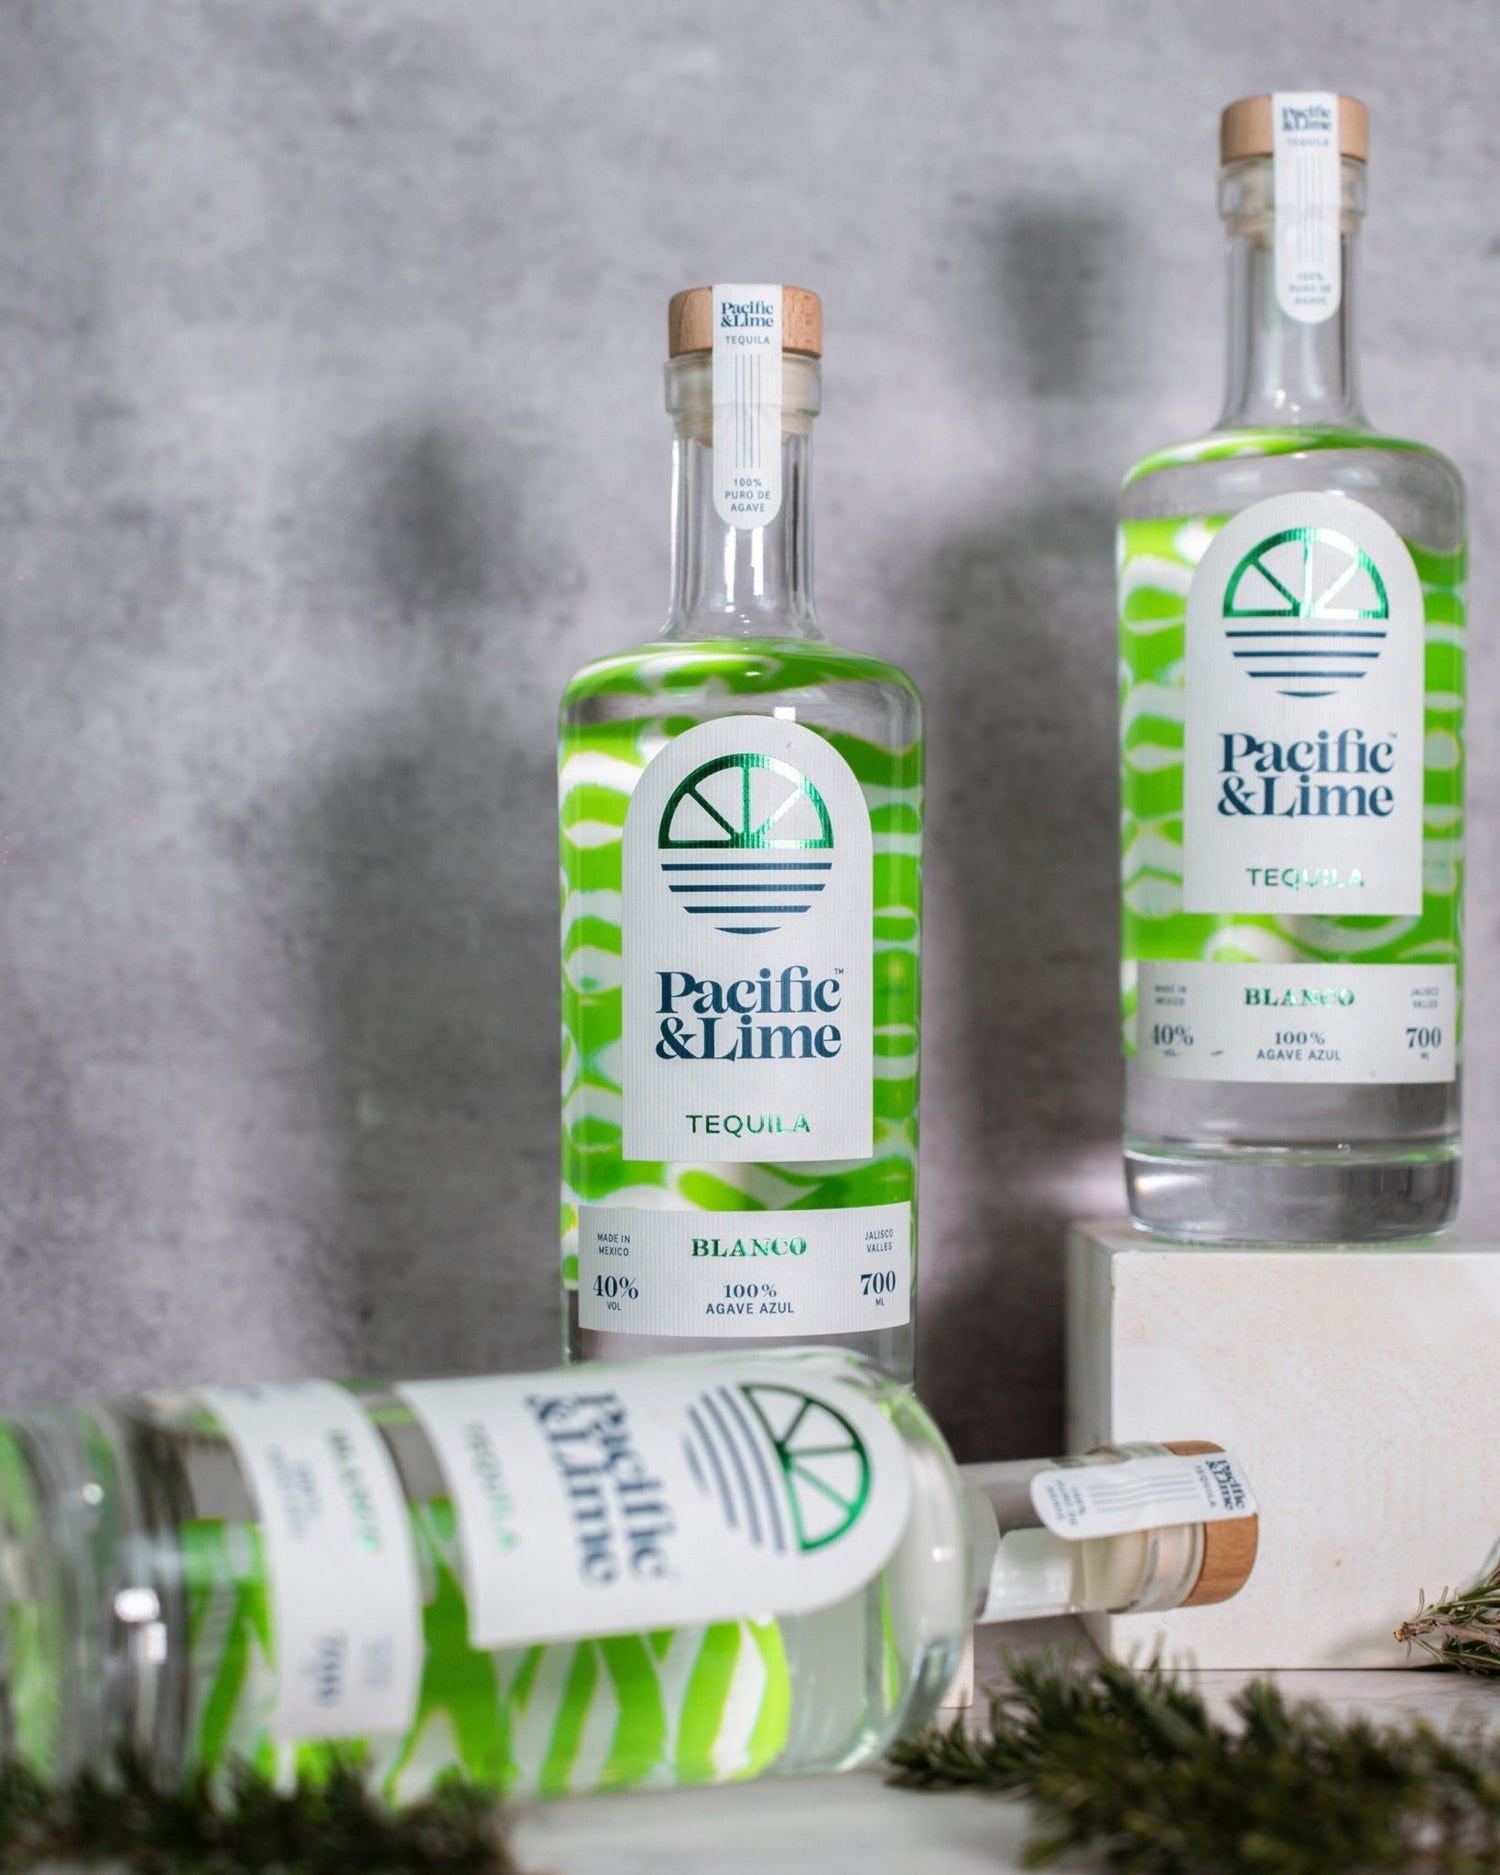 Tequila Pacific & Lime | Blanco | 70cl ∙ 40% vol - Pacific & Lime